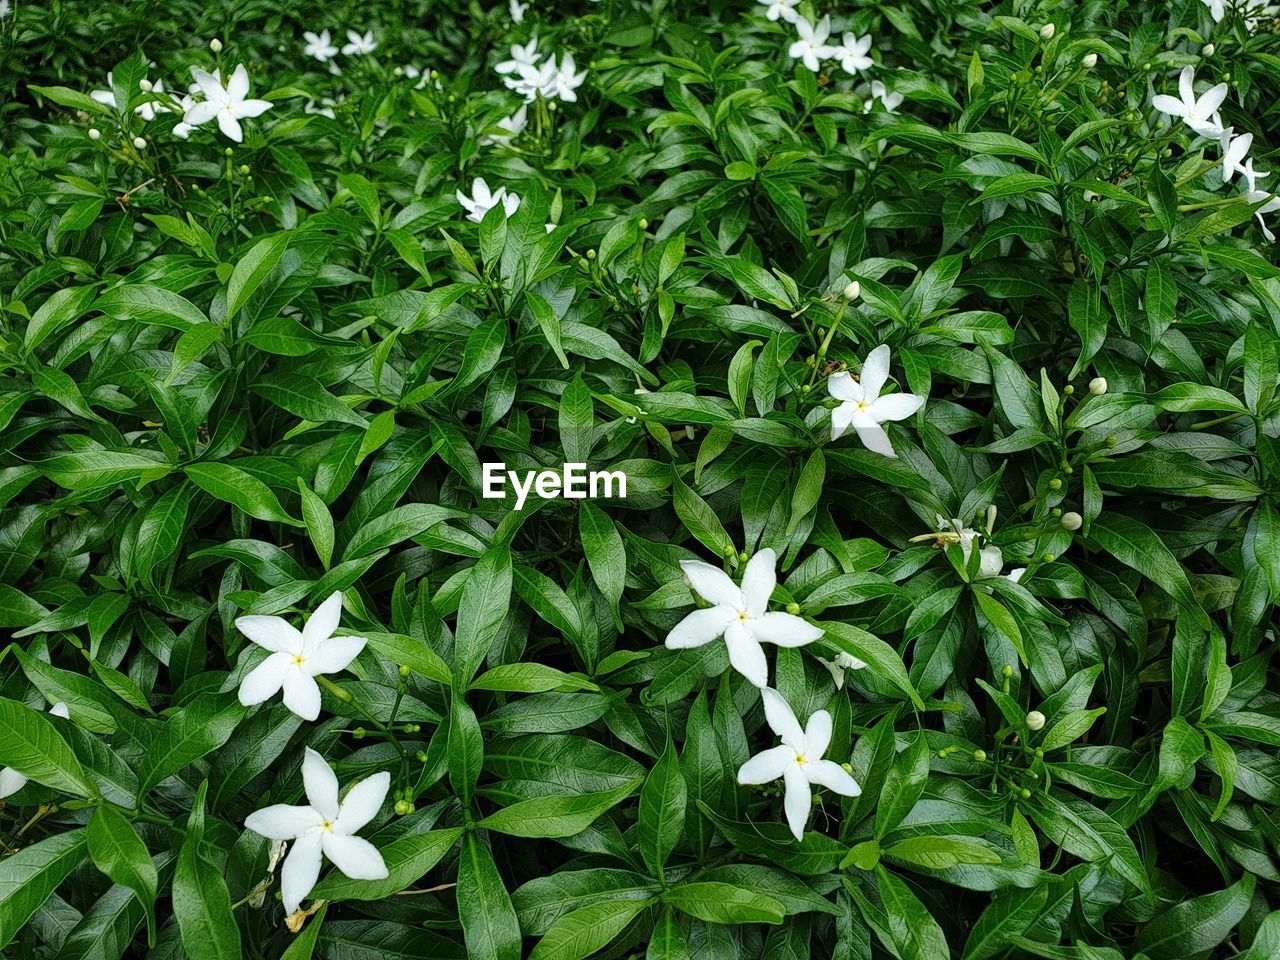 HIGH ANGLE VIEW OF WHITE FLOWERING PLANT ON FIELD